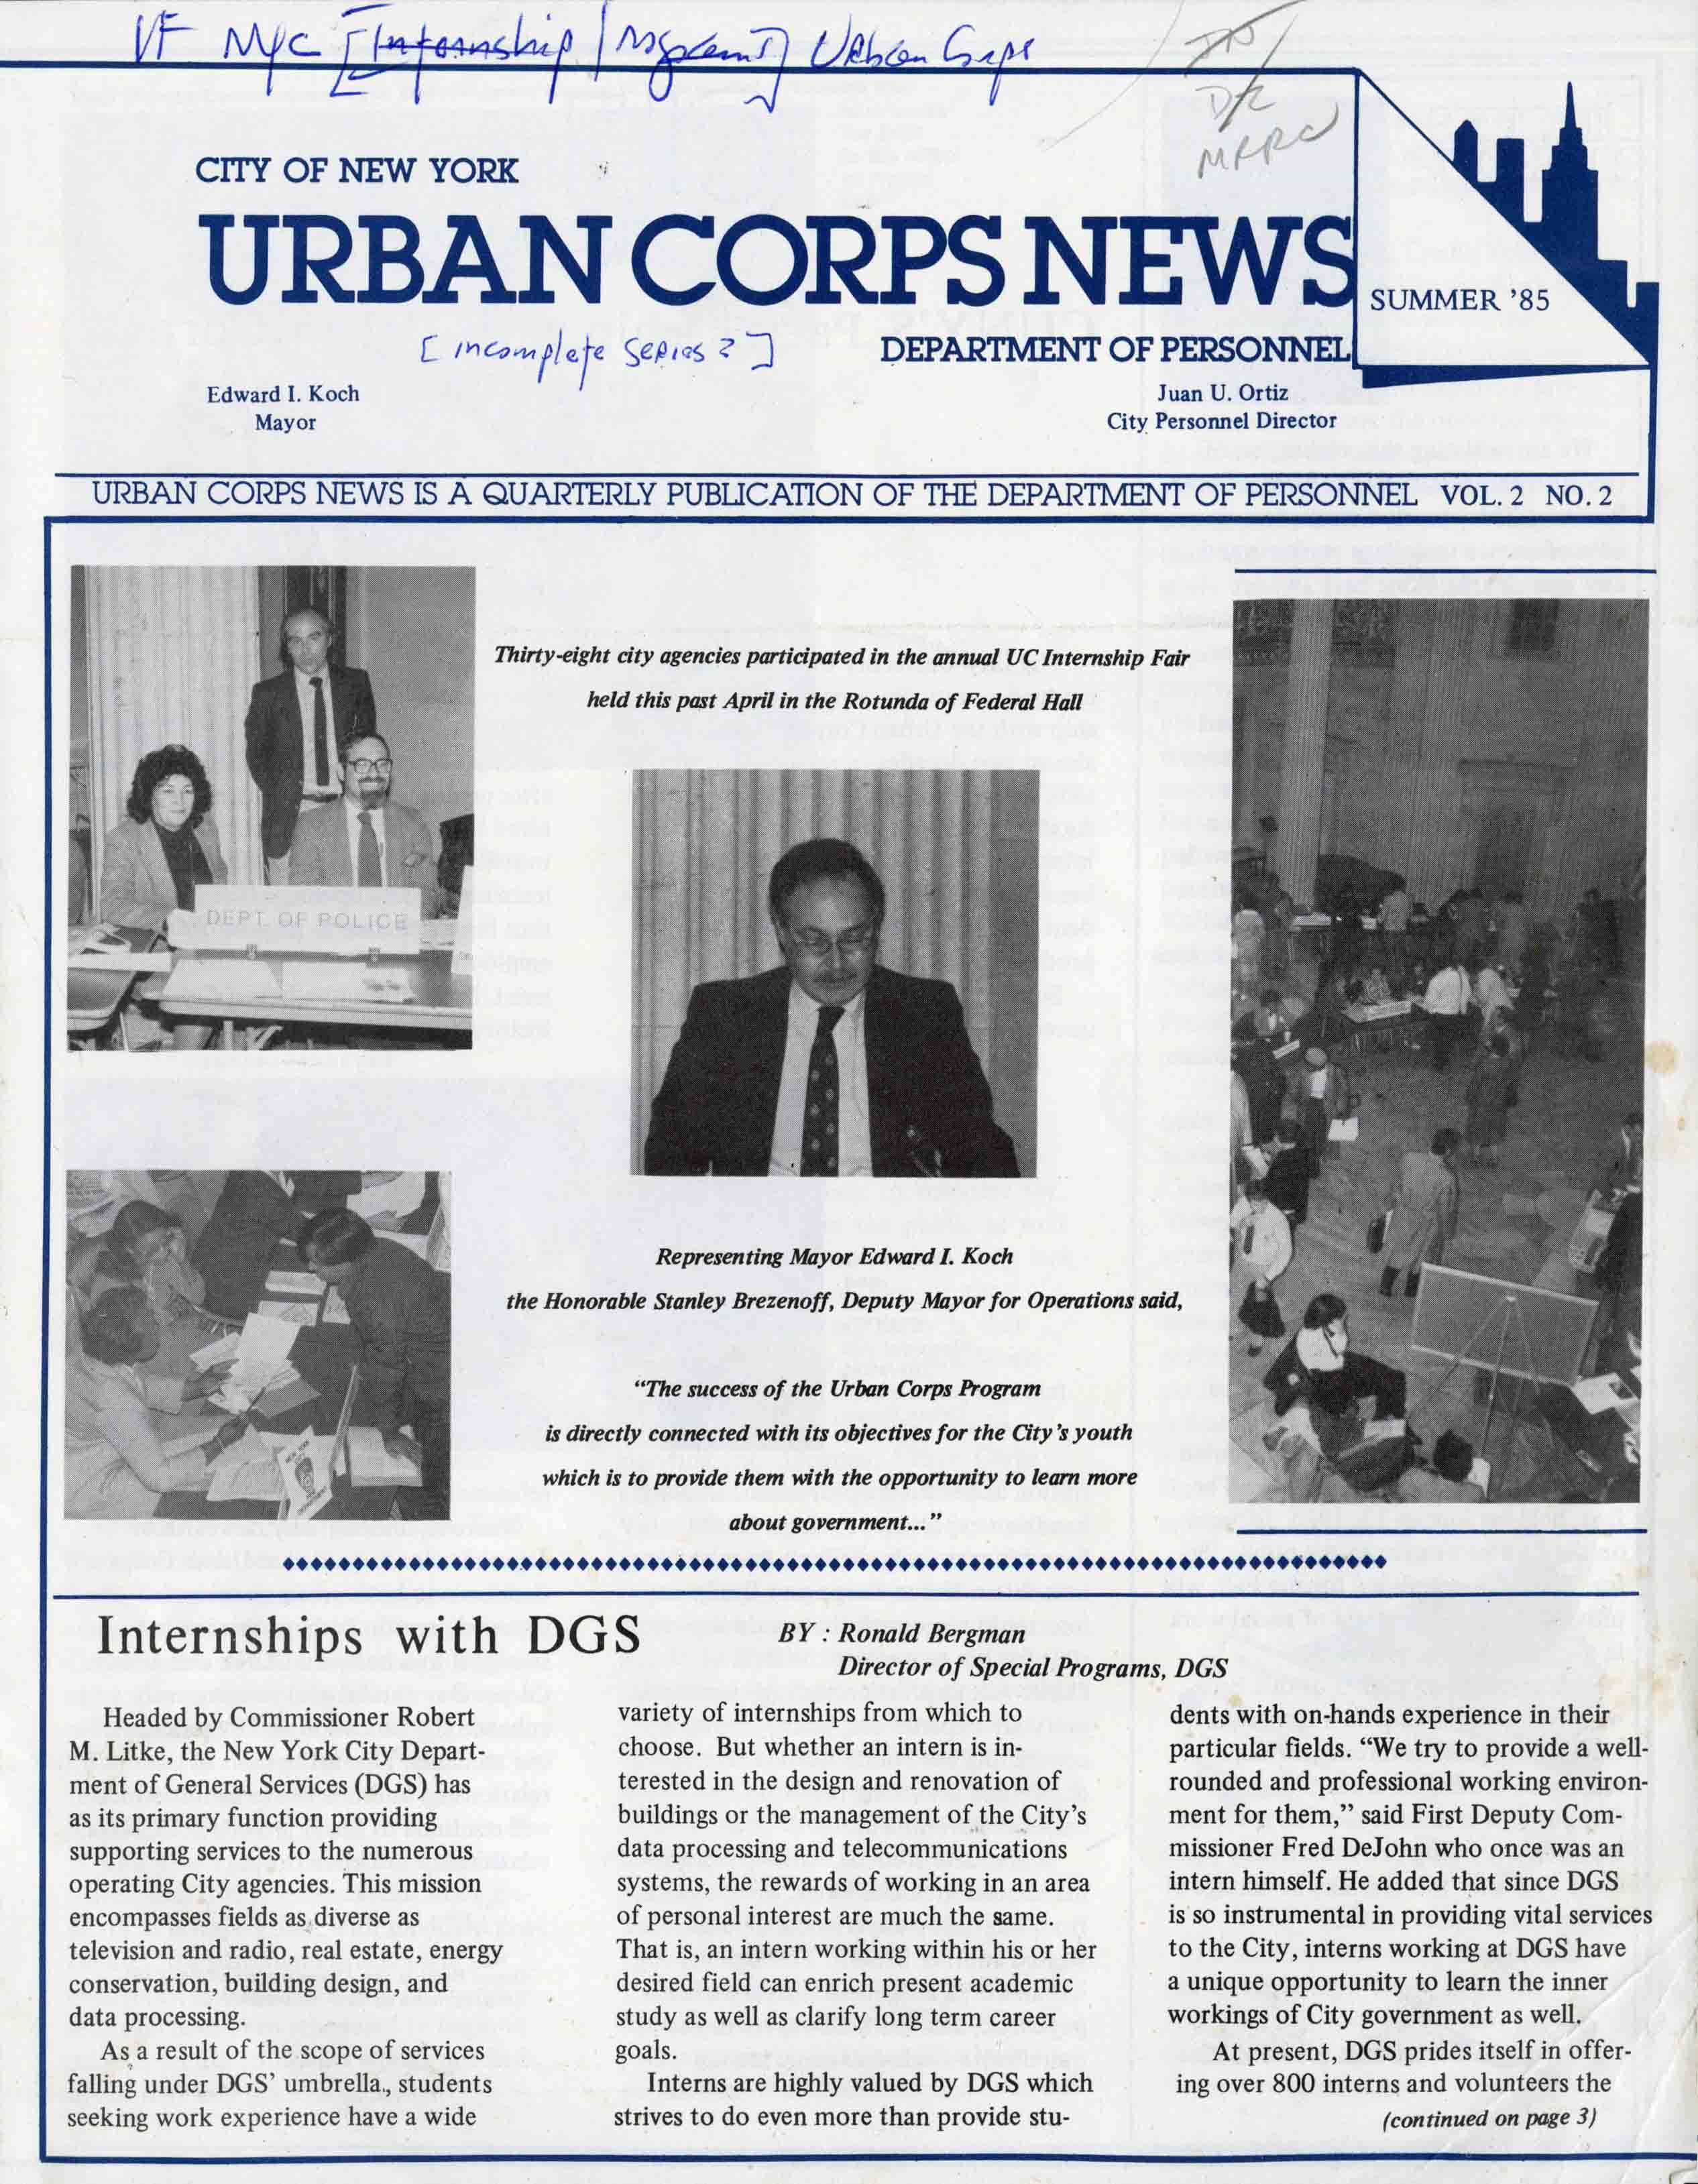 1985 newsletter with five black and white images showing people at work and a portion of an article called Internships with DGS or the Department of General Services.